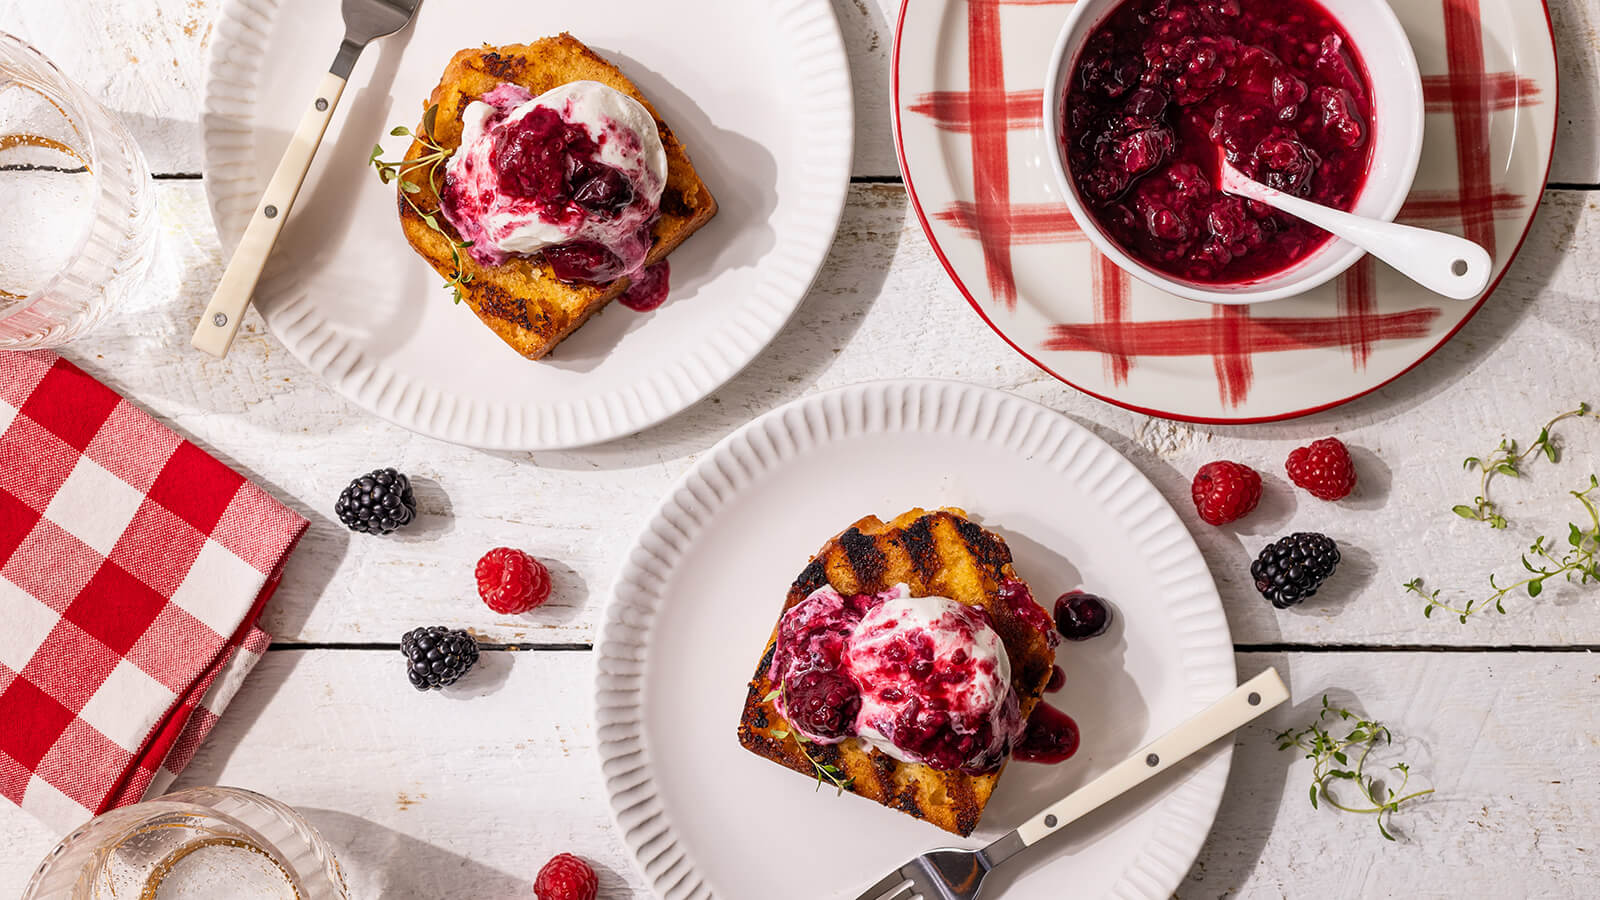 Grilled Pound Cake with Roasted Berries in Wine a la Mode